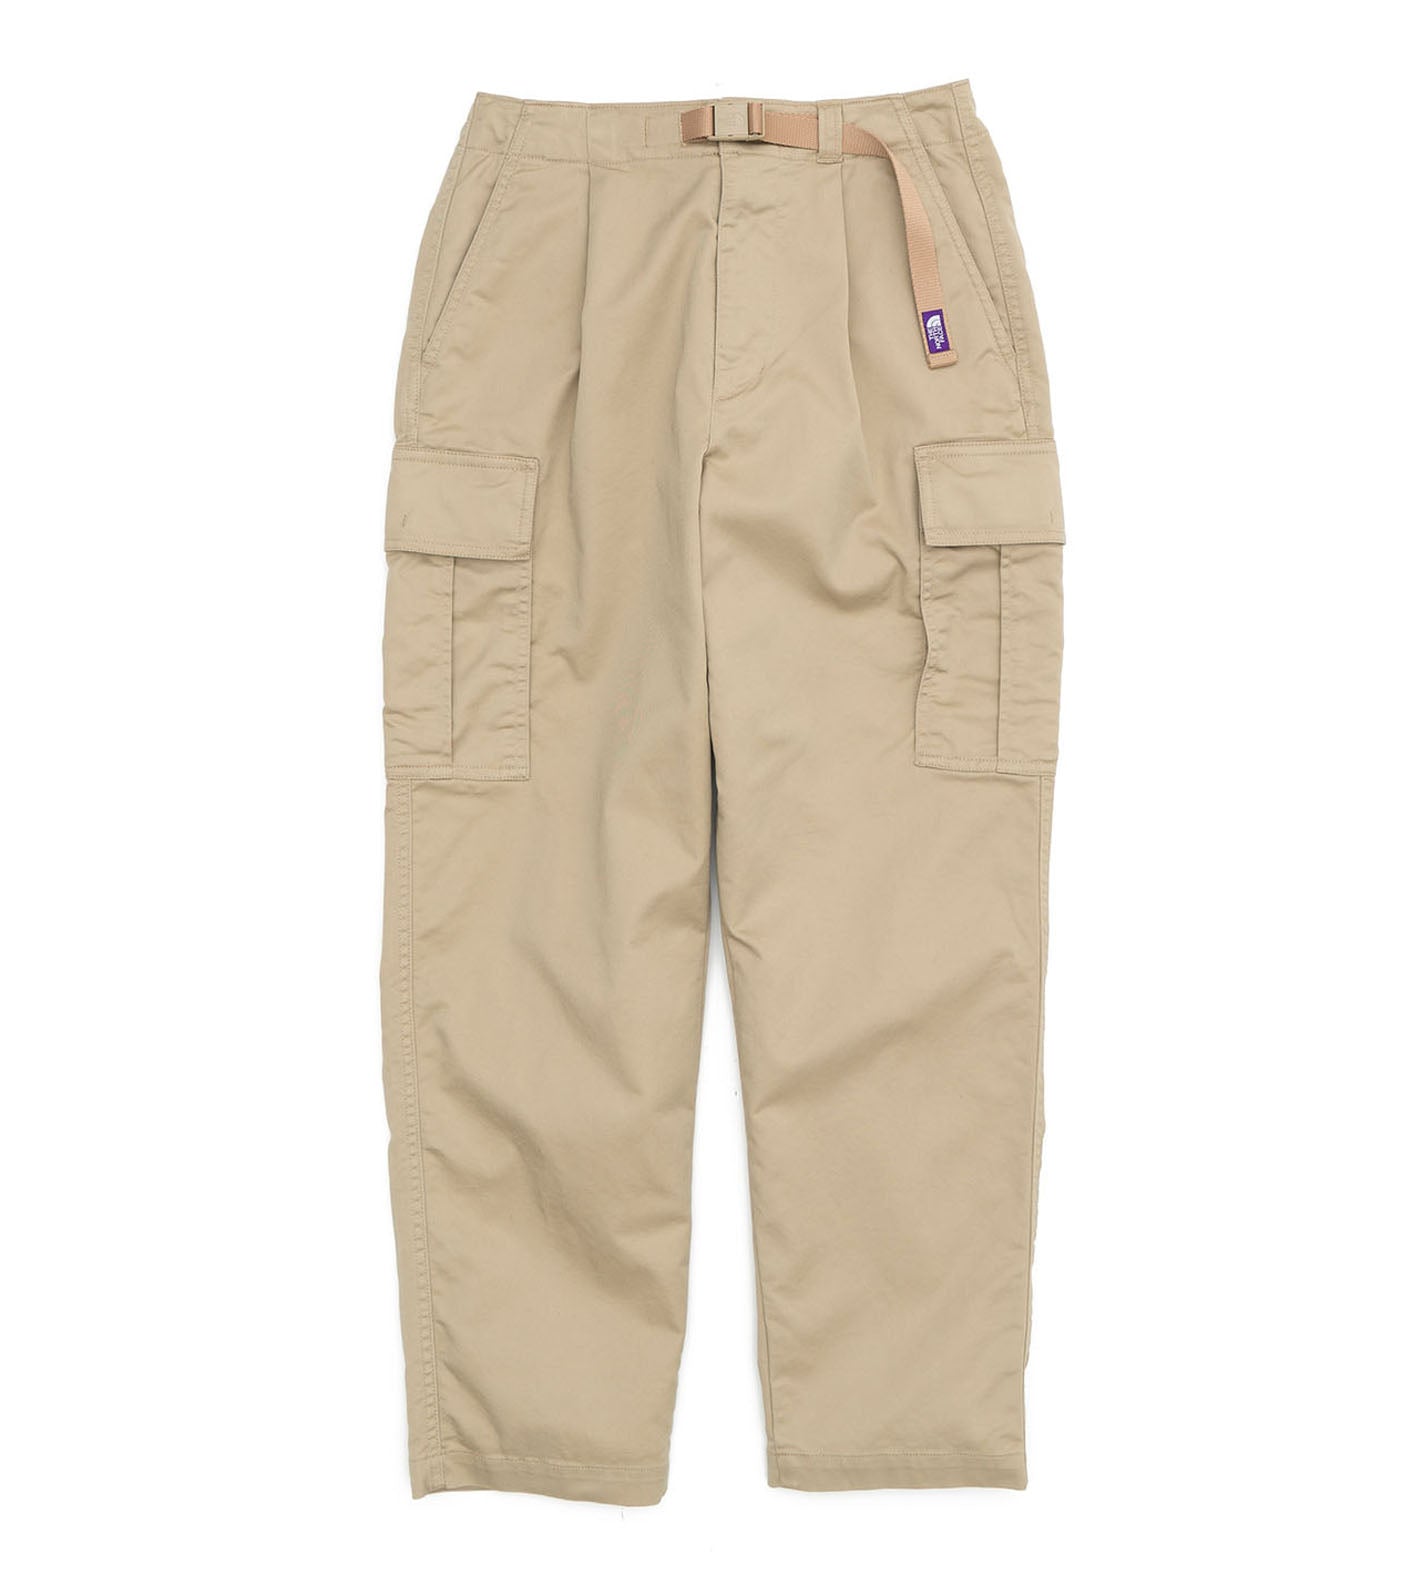 THE NORTH FACE PURPLE LABEL Stretch Twill Cargo Pants